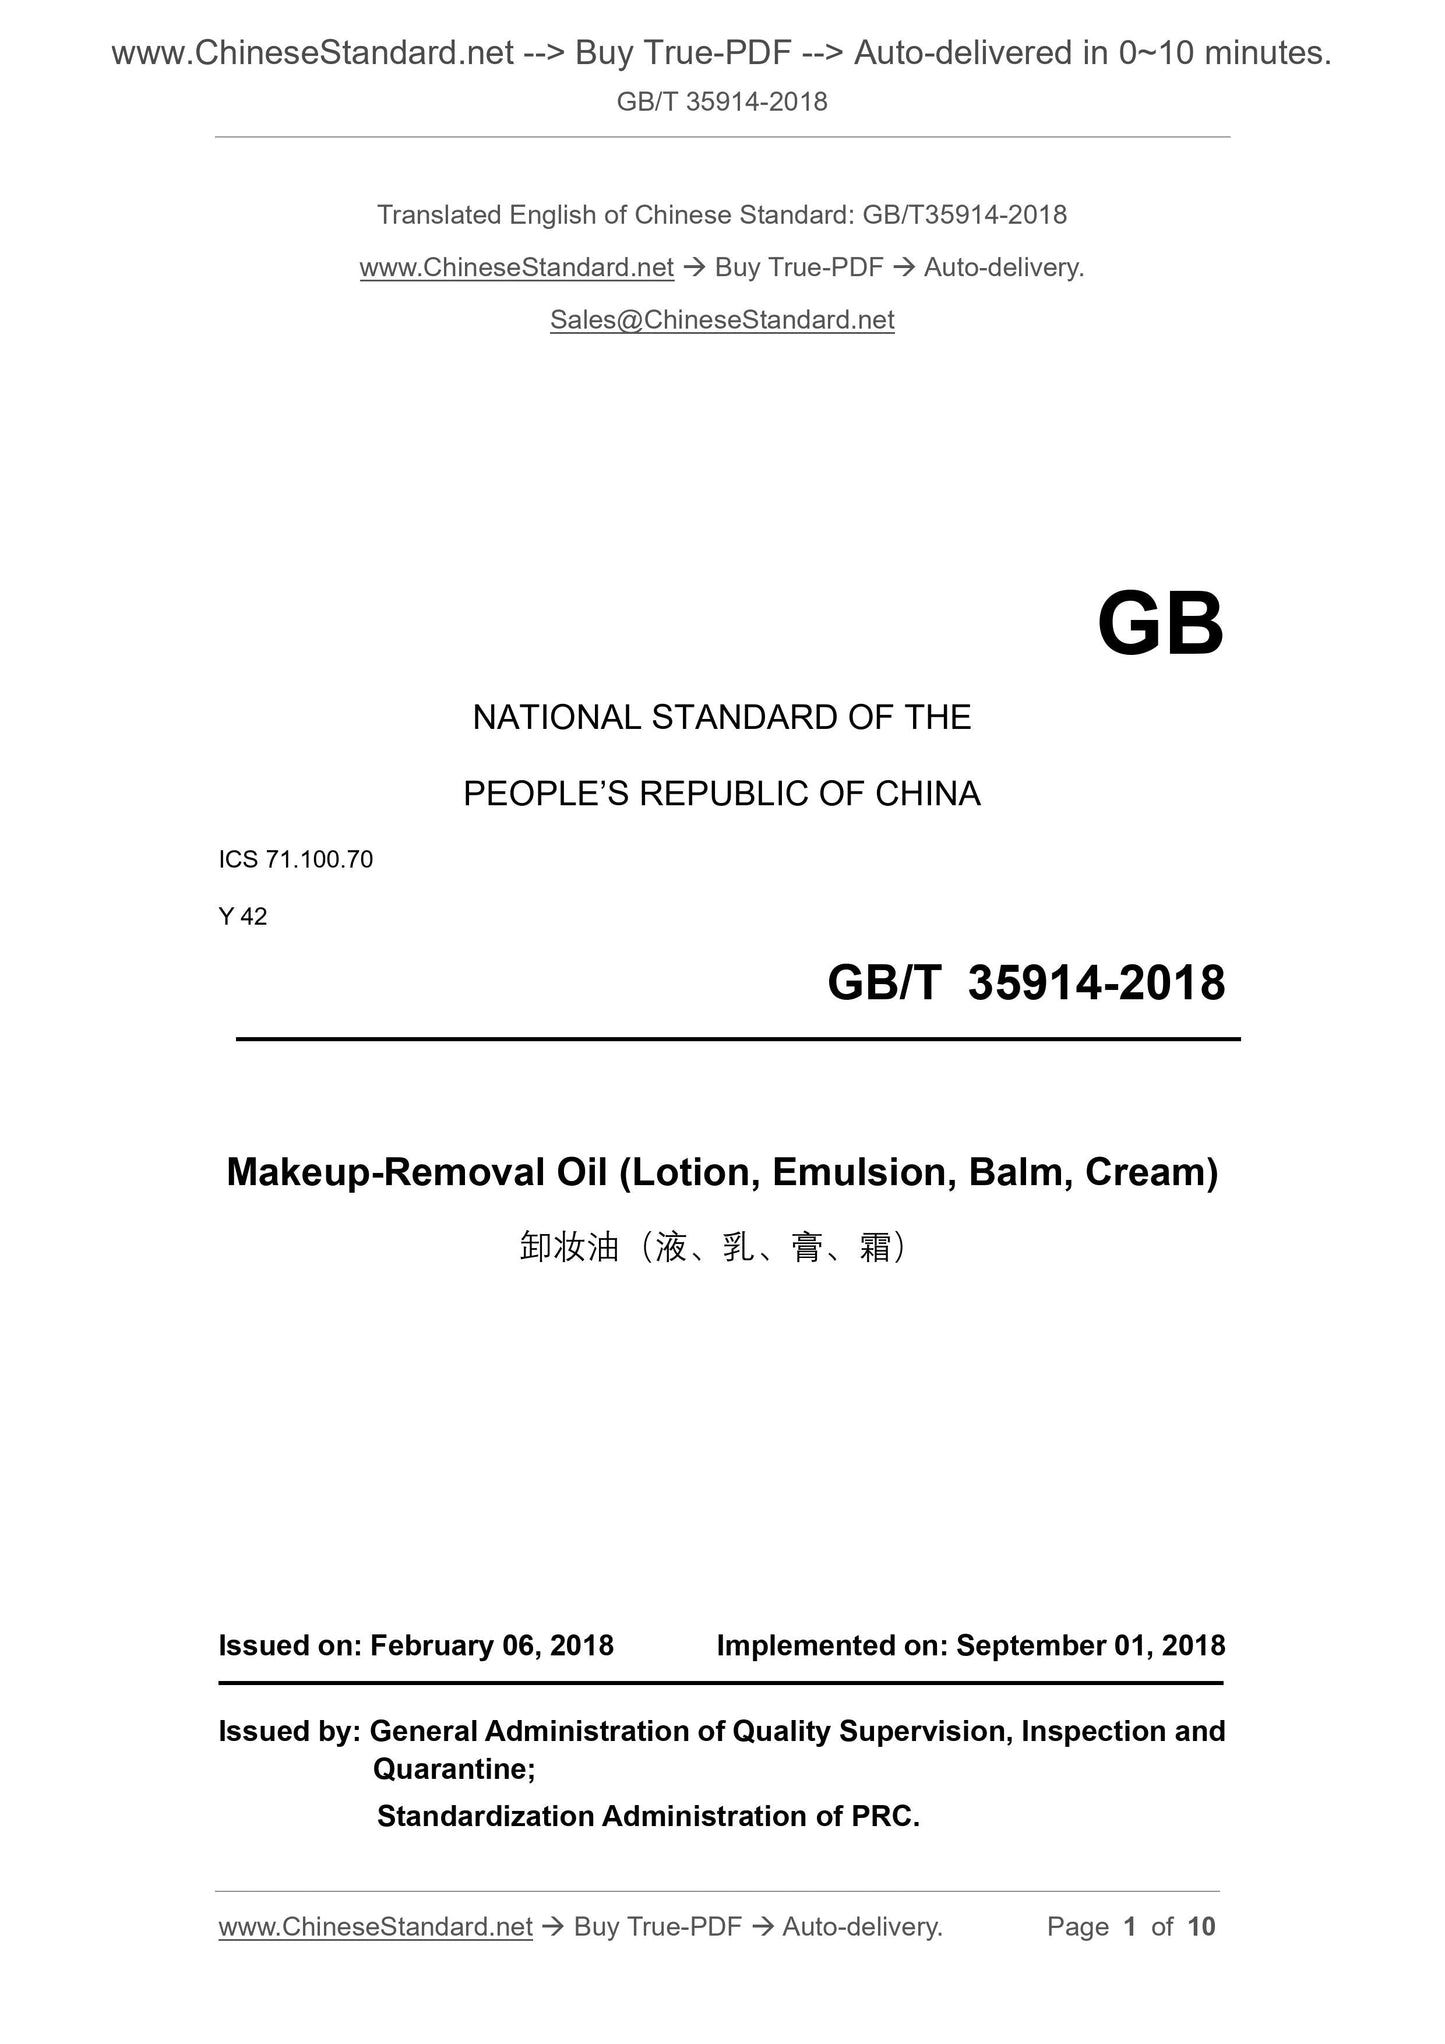 GB/T 35914-2018 Page 1